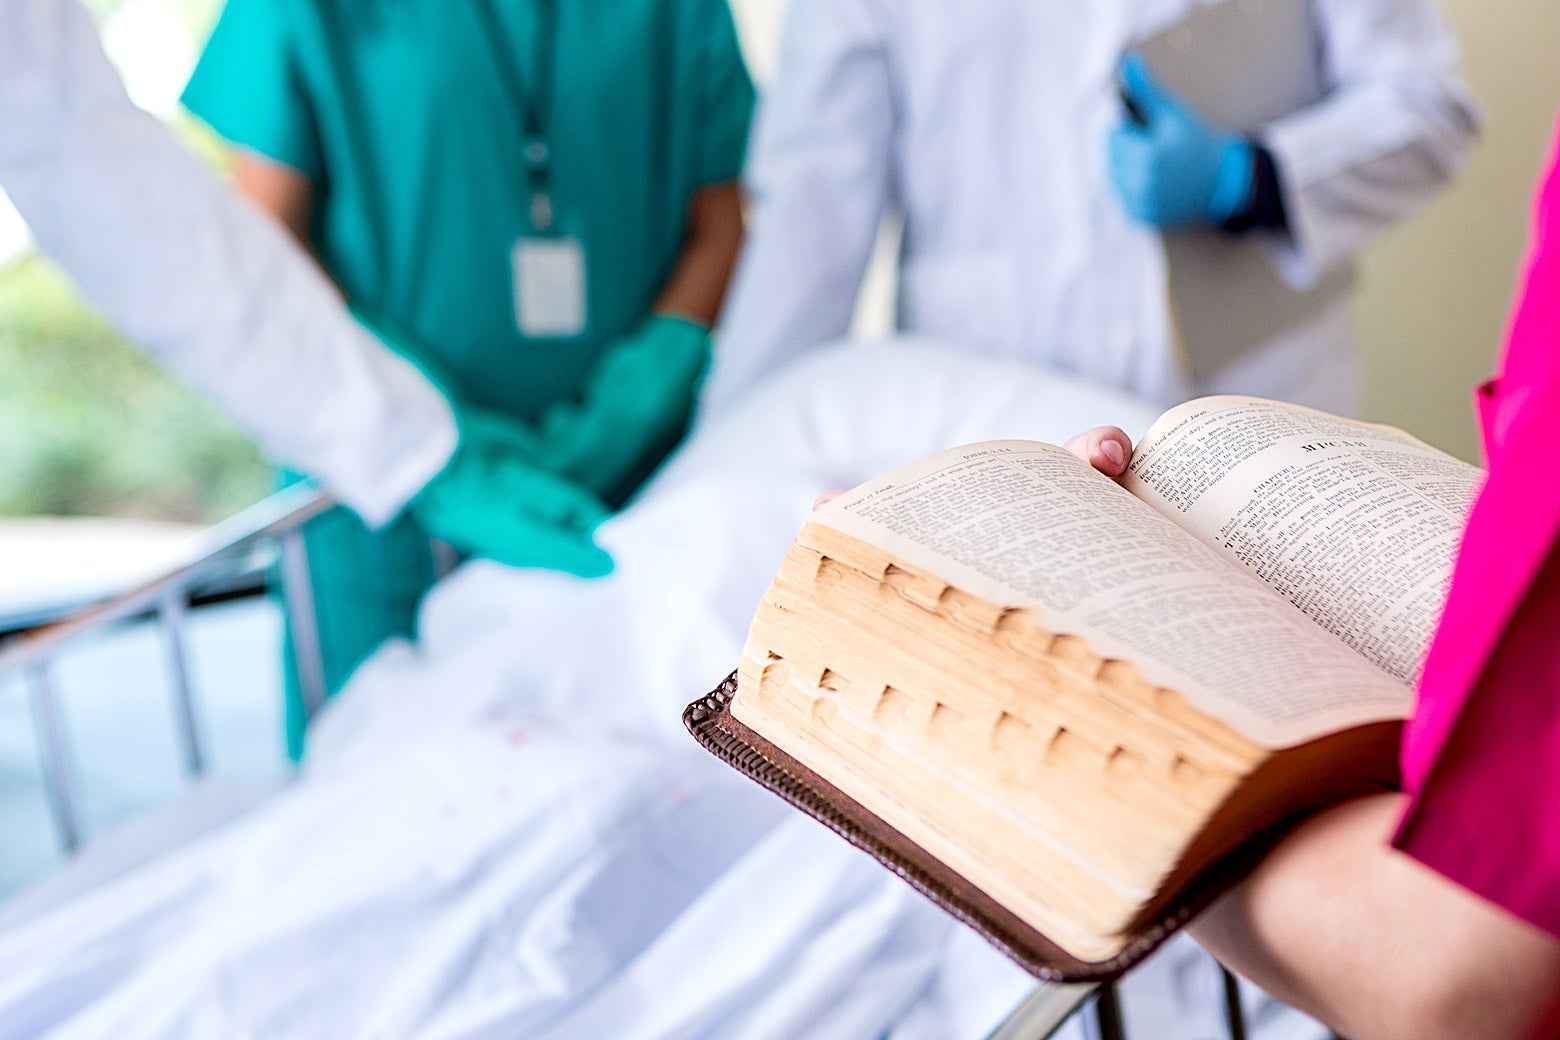 Doctors stand at the foot of a bed and put their hands on a patient's body. Across from the, a person holds open a heavy book.